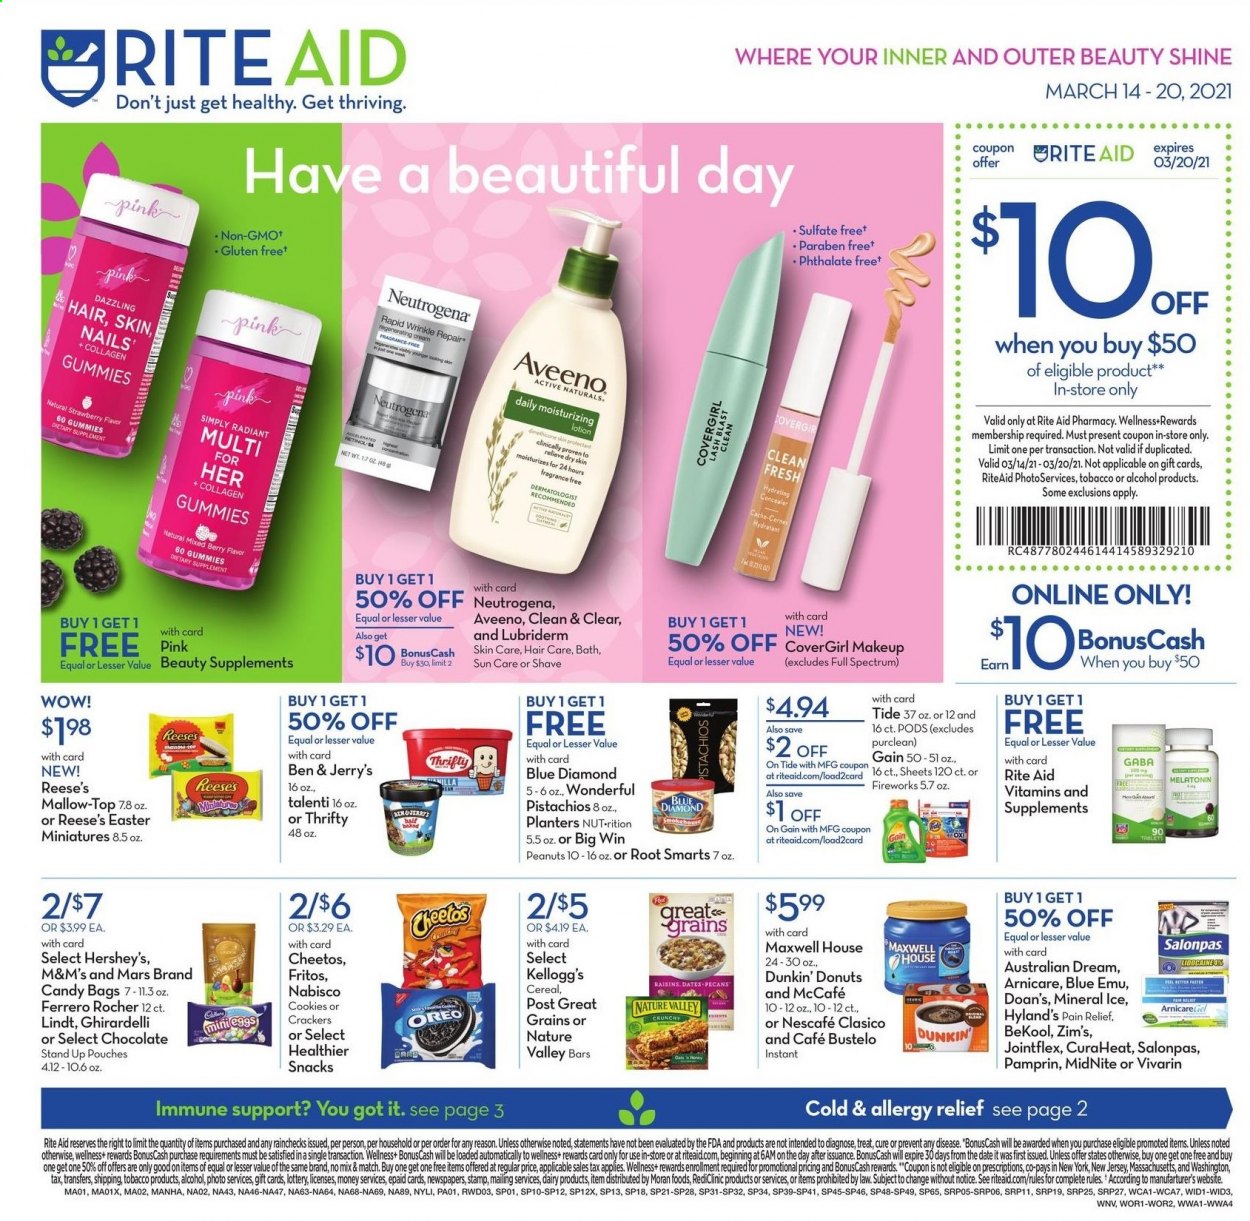 thumbnail - RITE AID Flyer - 03/14/2021 - 03/20/2021 - Sales products - Oreo, Reese's, Hershey's, Ben & Jerry's, Talenti Gelato, cookies, chocolate, Lindt, Ferrero Rocher, Mars, M&M's, crackers, Kellogg's, Ghirardelli, Cheetos, snack, cereals, Fritos, Nature Valley, raisins, peanuts, pecans, pistachios, dried dates, Planters, Blue Diamond, Maxwell House, Nescafé, McCafe, Dunkin' Donuts, alcohol, Aveeno, Gain, Tide, Neutrogena, Clean & Clear, body lotion, Lubriderm, makeup, bag, pain relief, Melatonin, Spectrum, allergy relief, dietary supplement, donut. Page 1.